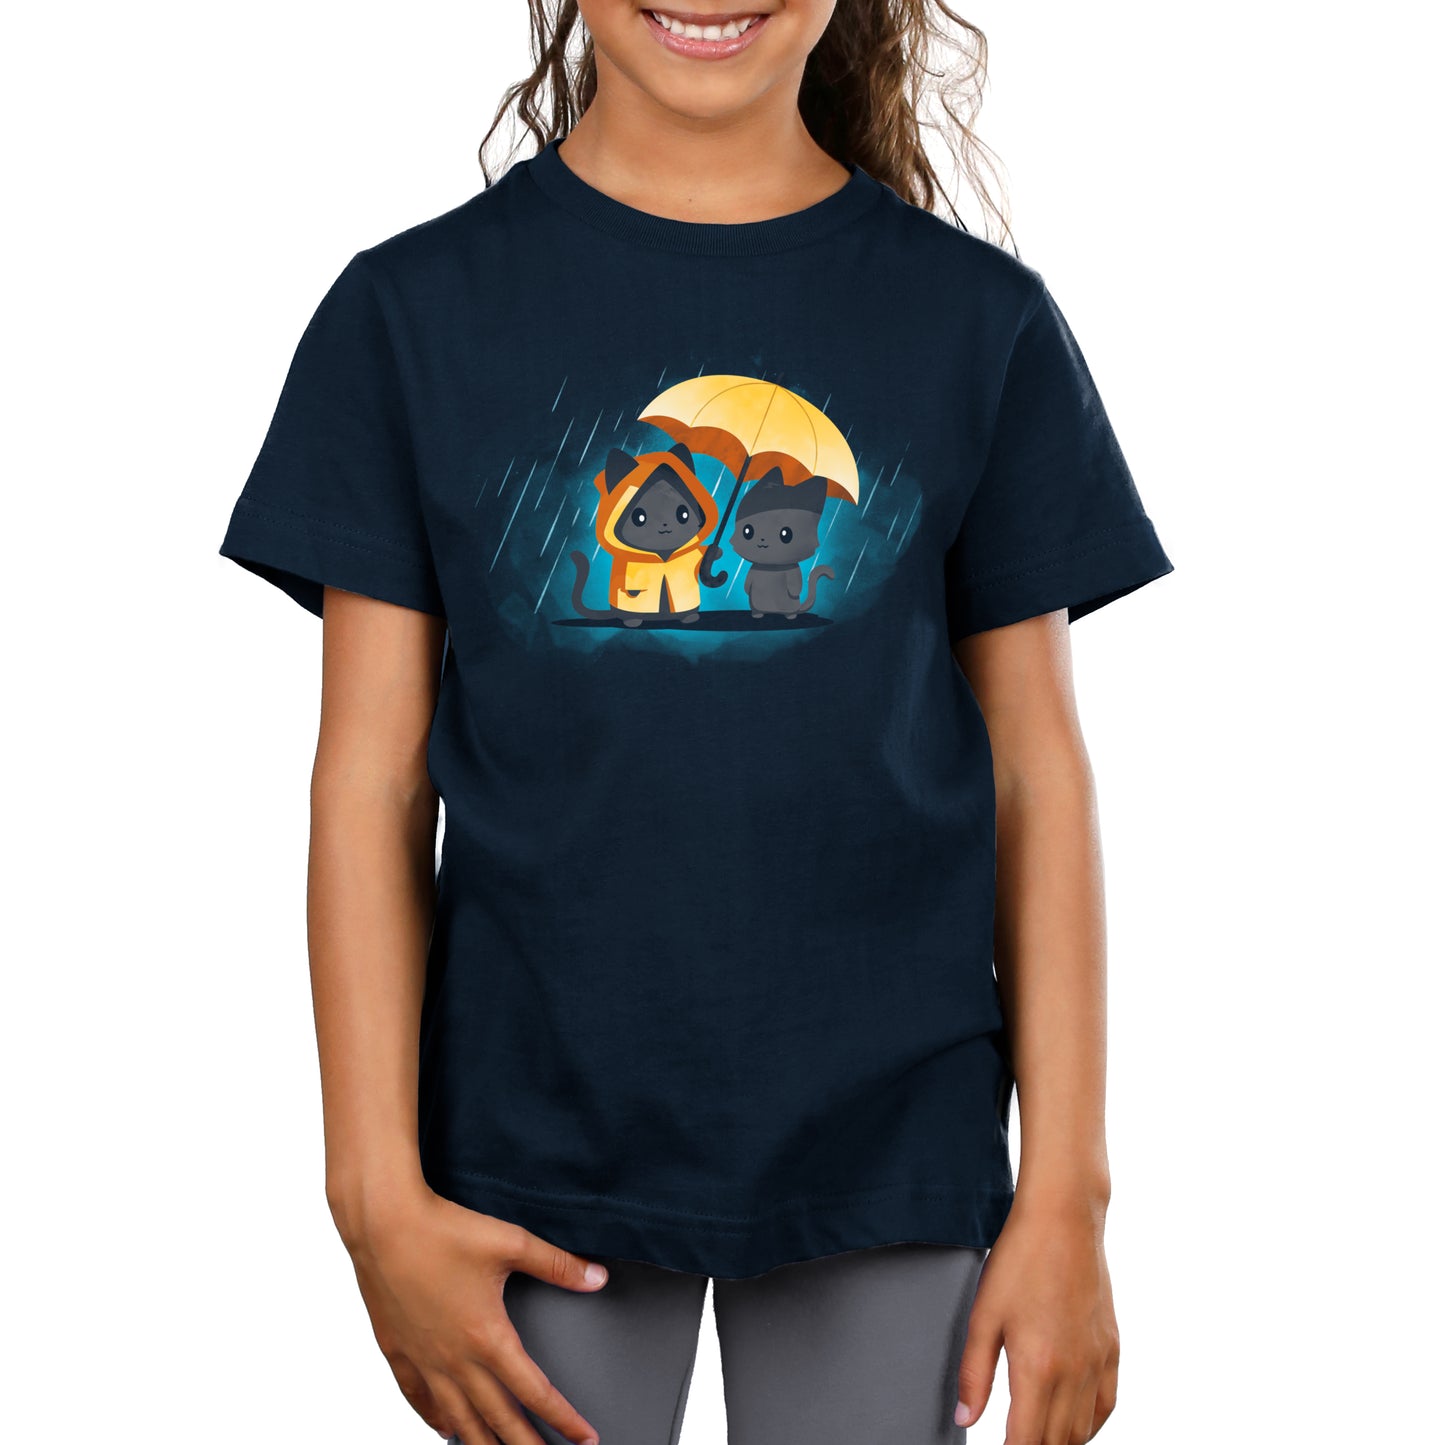 Child wearing a navy blue unisex tee made from 100% super soft ringspun cotton, featuring a graphic of two cartoon puppies under a yellow umbrella in the rain, named "Sharing Kindness" by monsterdigital.